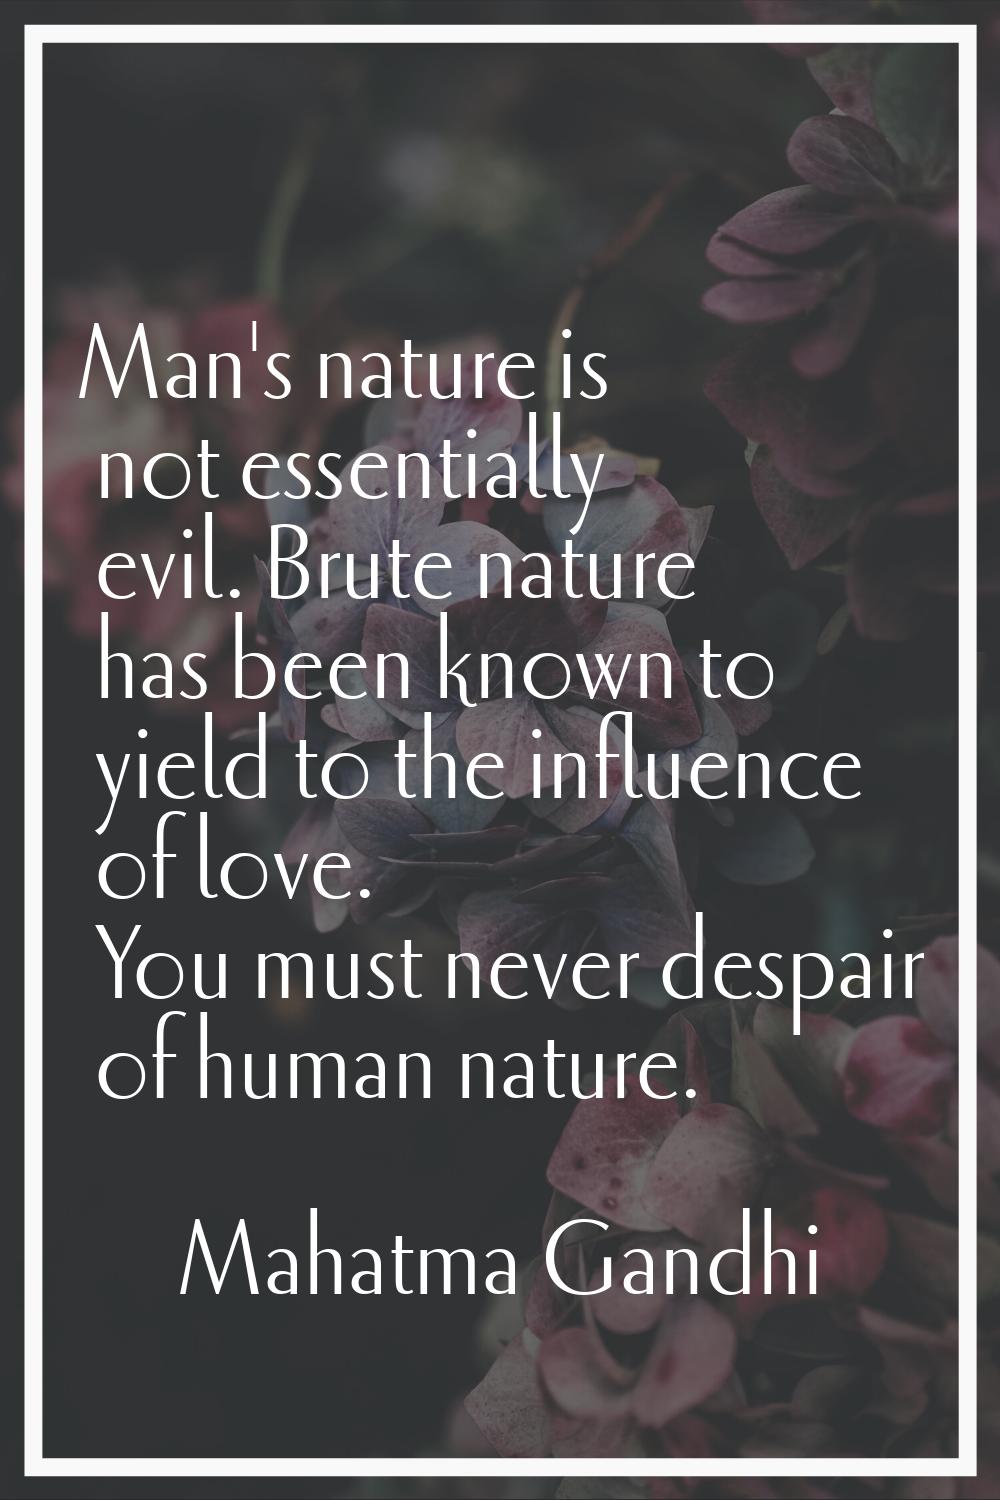 Man's nature is not essentially evil. Brute nature has been known to yield to the influence of love